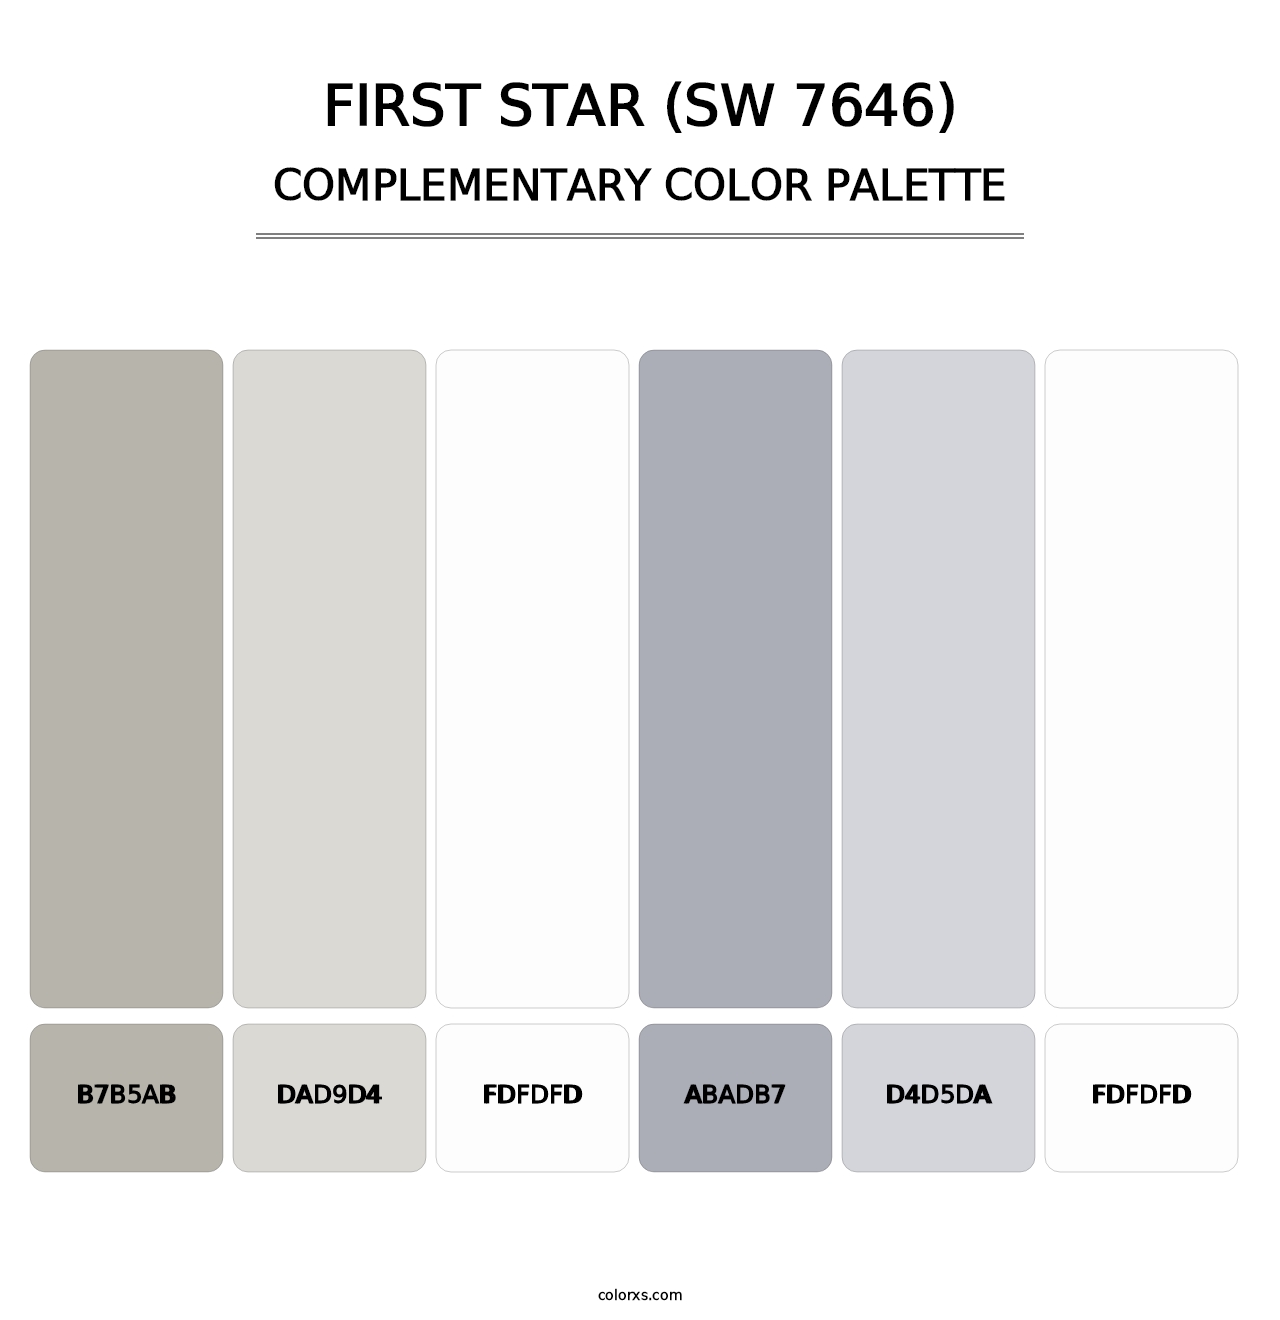 First Star (SW 7646) - Complementary Color Palette